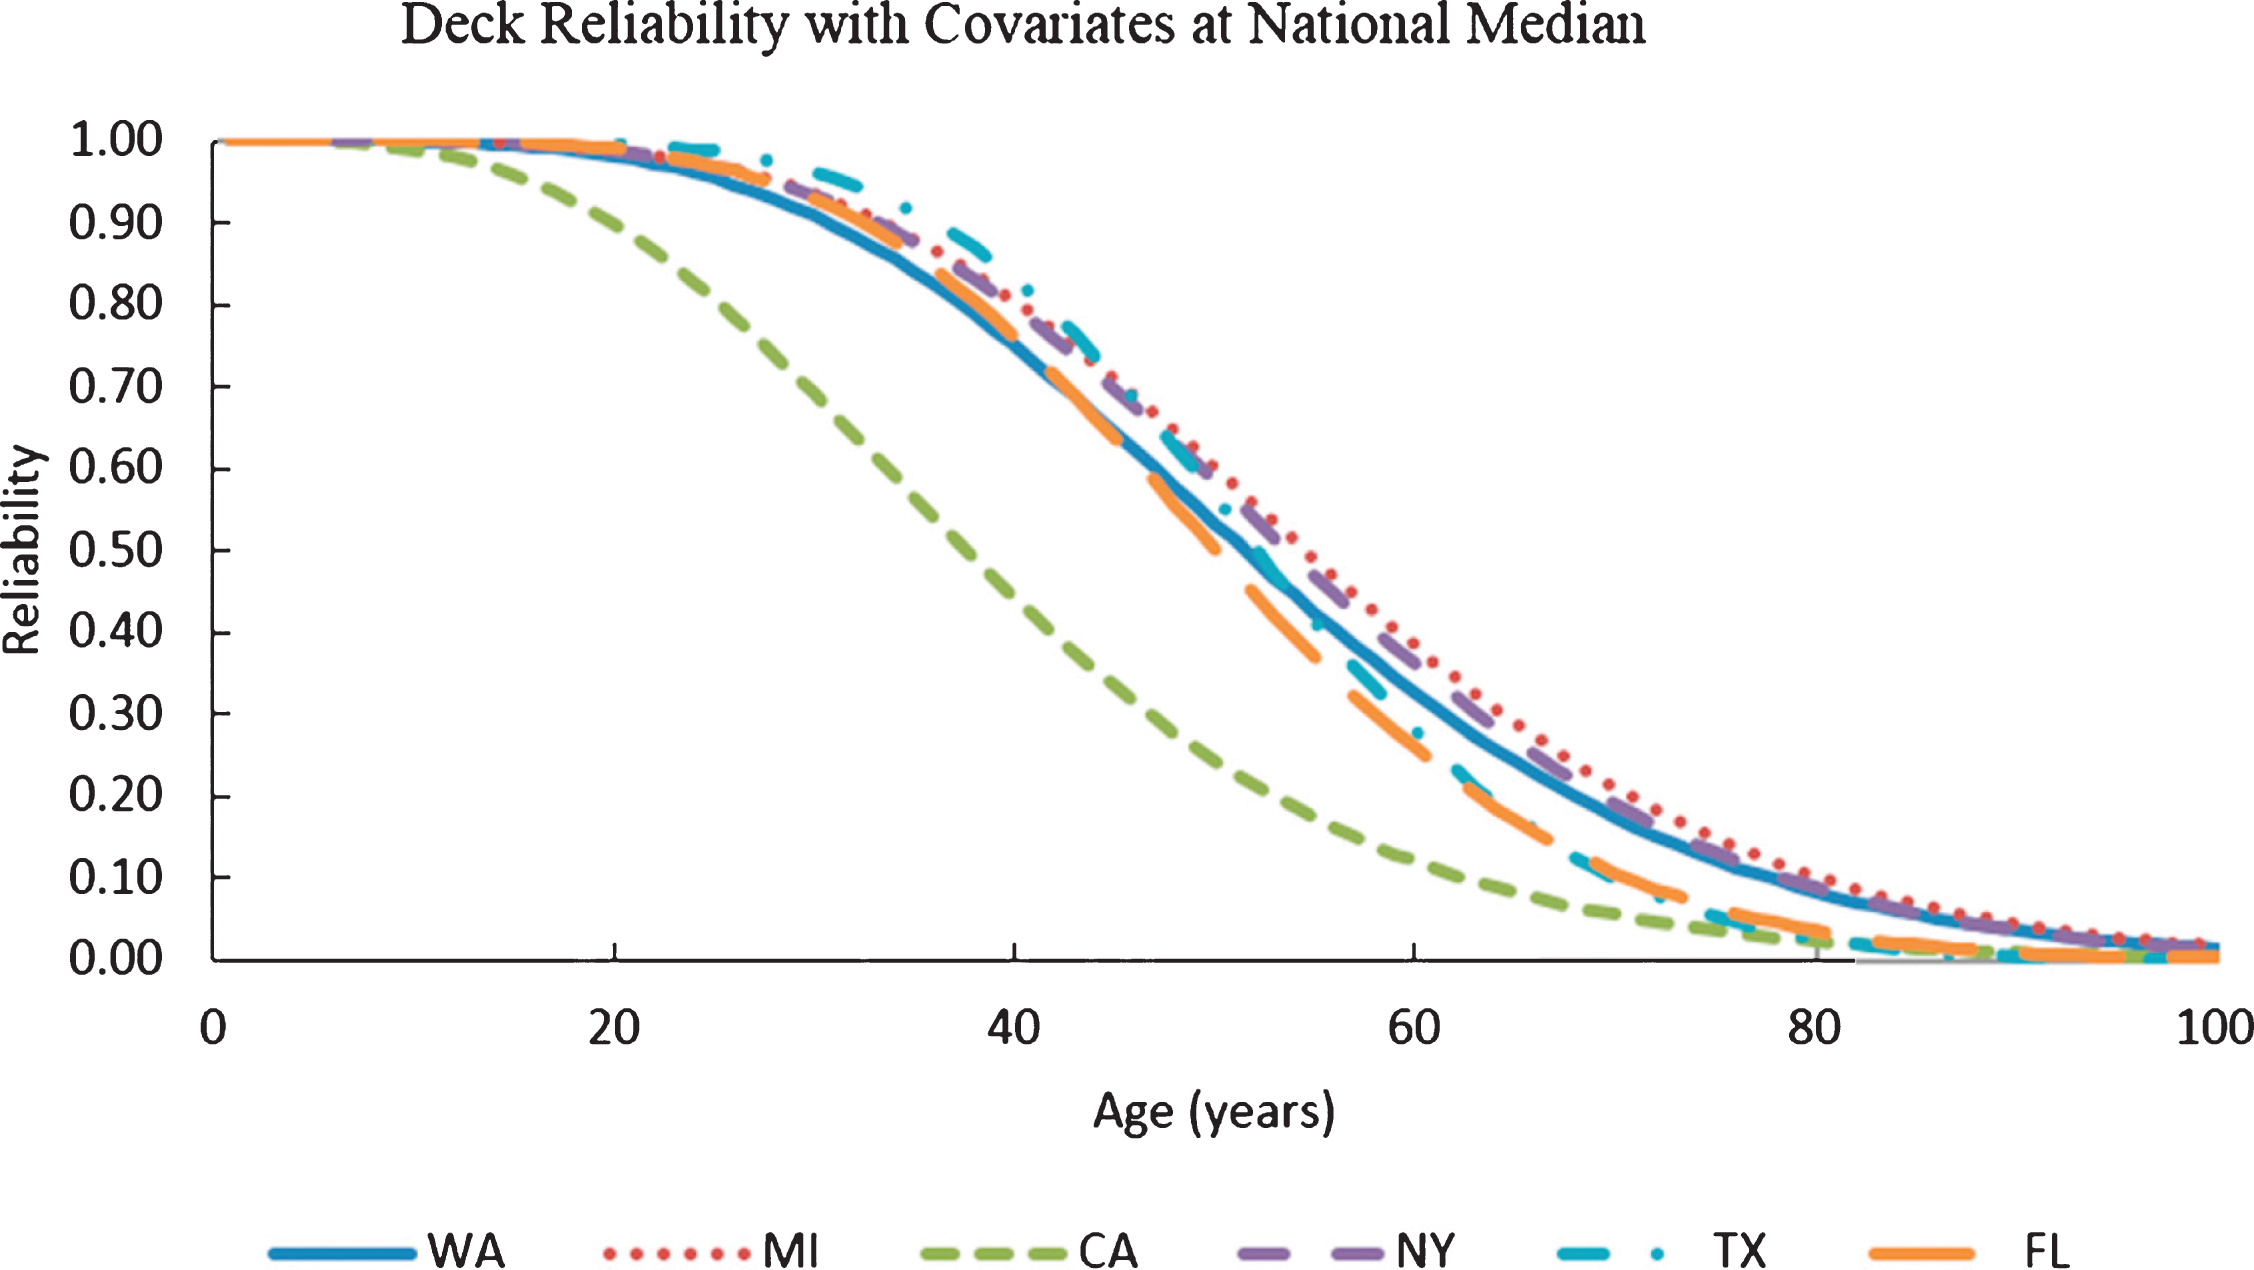 Variation of deck reliability with age for Washington State, California, Michigan, Florida, Texas, and New York with ADT and deck areas at national median (ADT = 1703 and deck area = 355.3 m2).